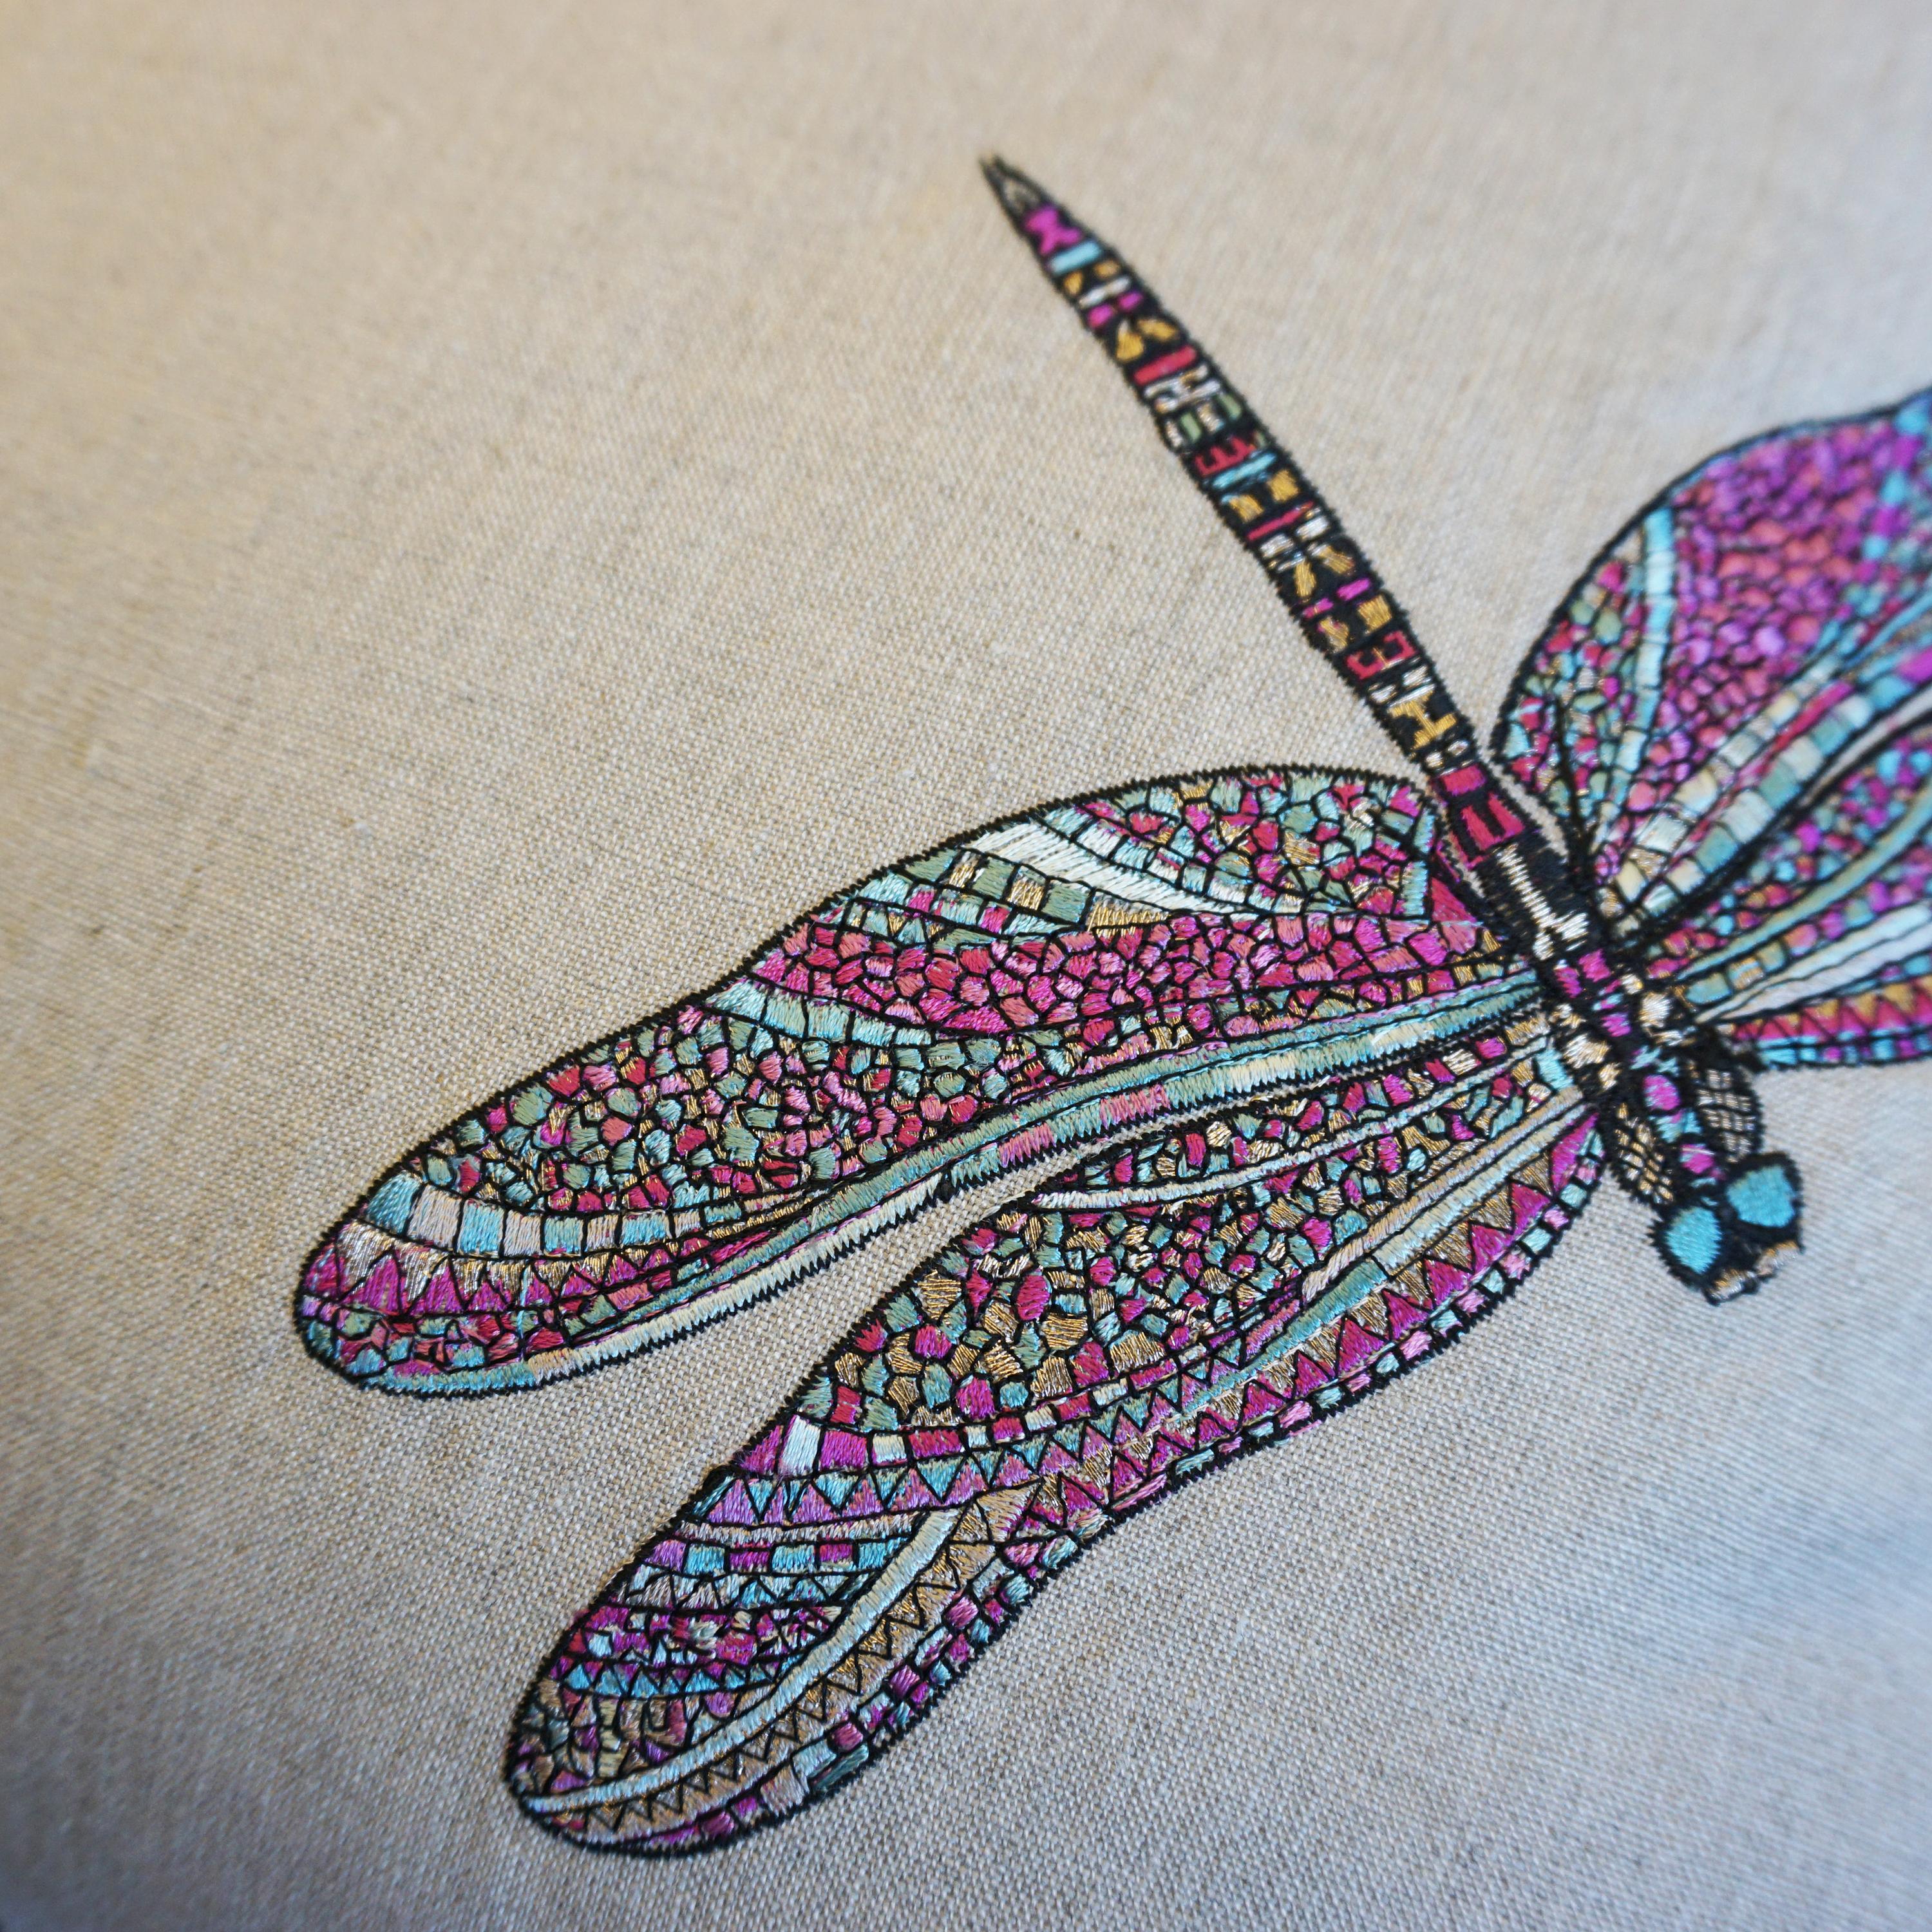 Our Dancing Dragonfly pillows are one of a kind. The pillows are made with a stunning embroidered linen print of multicolored dragonflies. The back it sewn in a distressed textured fabric and is bordered with a pink piping accent.